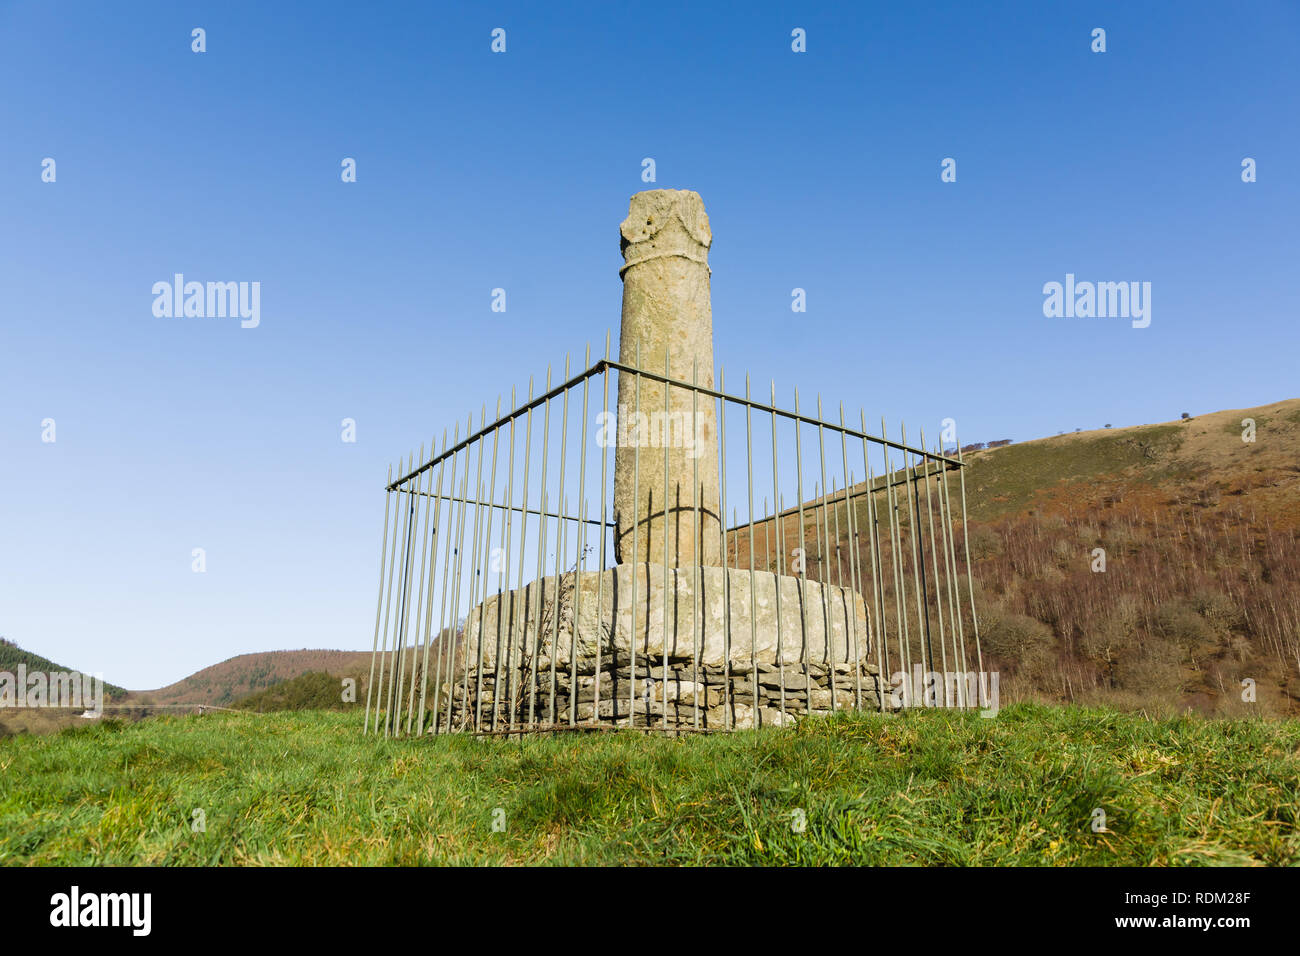 Elisegs Pillar a 9th century stone monument erected by Prince Cyngen ap Cadell of Powys near Valle Crucis Abbey Llangollen North Wales Stock Photo